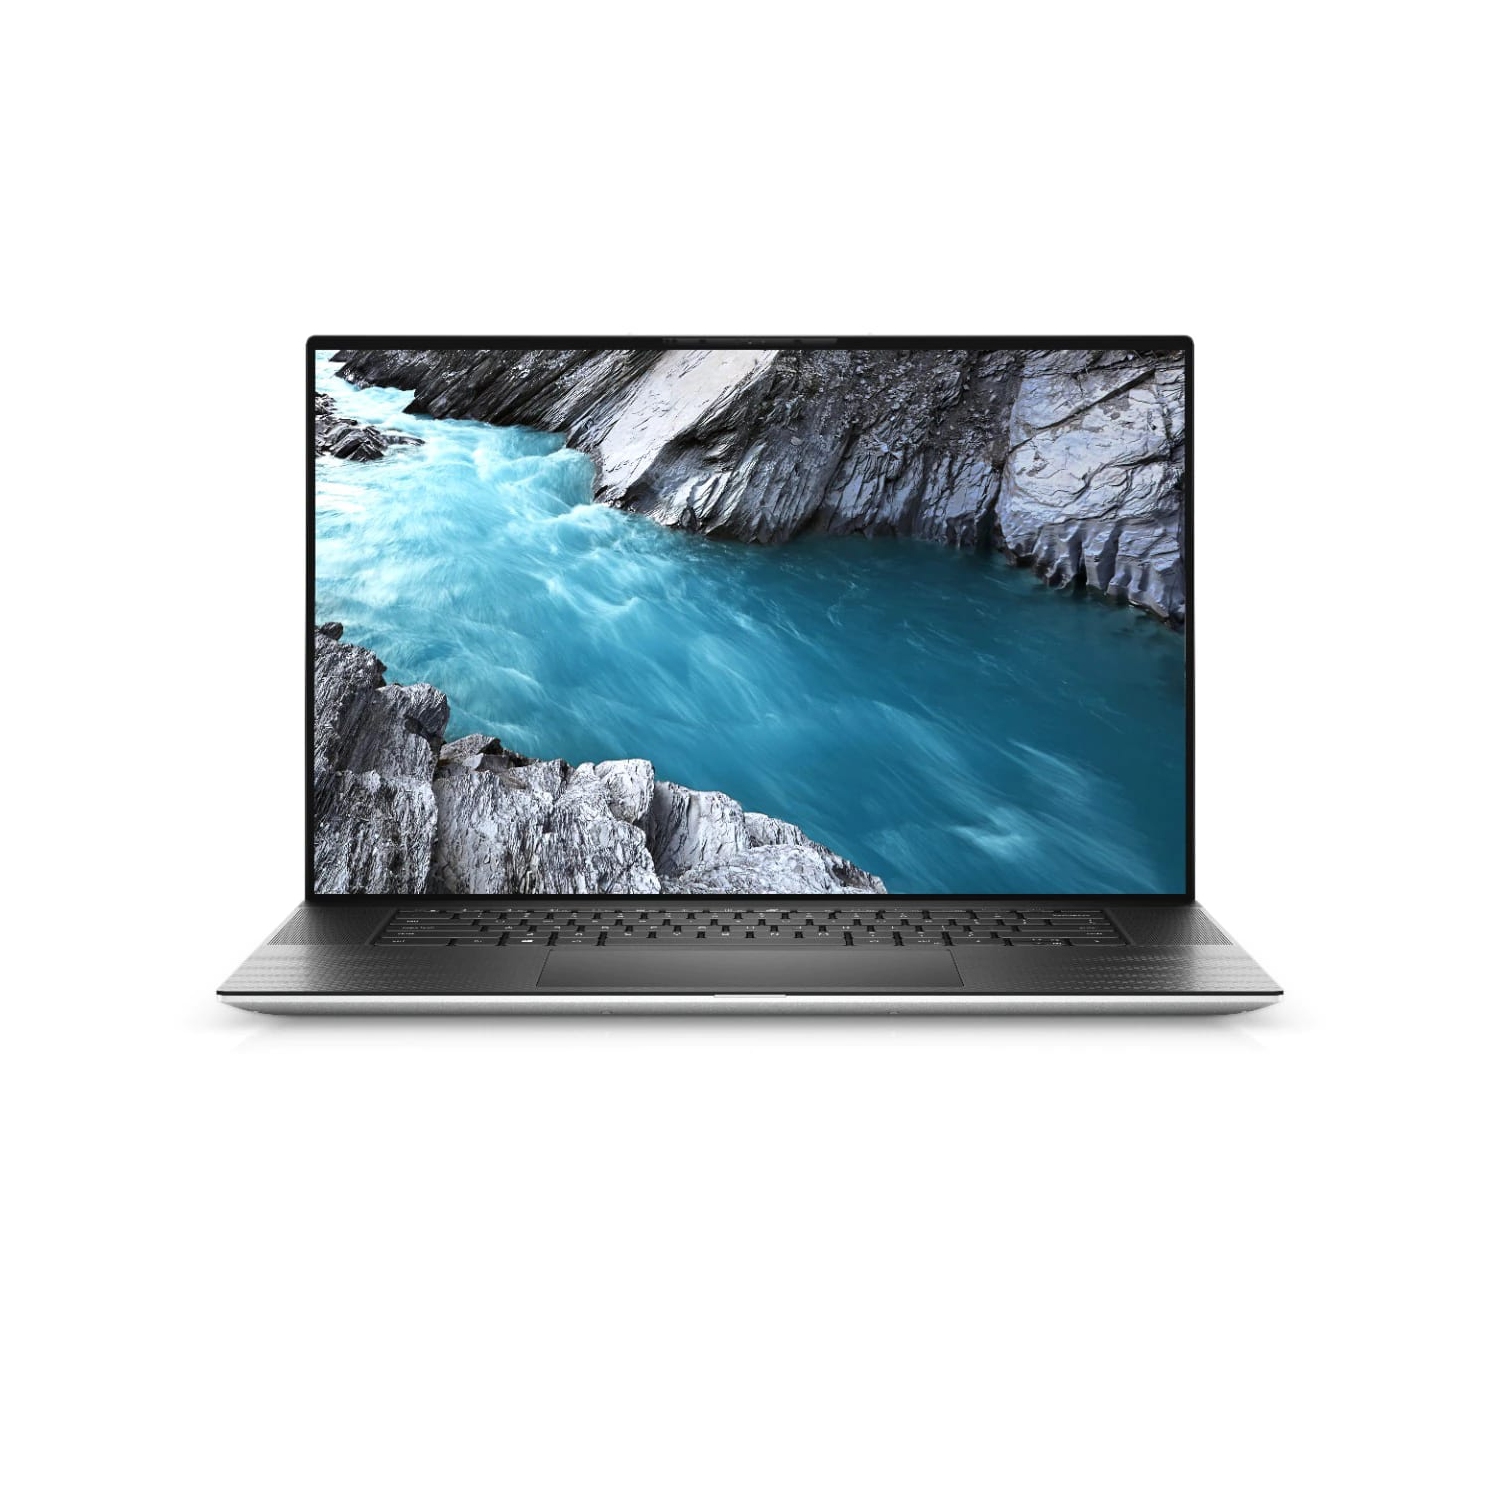 Refurbished (Excellent) - Dell XPS 17 9700 Laptop (2020) | 17" FHD+ | Core i7 - 2TB SSD - 16GB RAM - RTX 2060 | 8 Cores @ 5.1 GHz - 10th Gen CPU Certified Refurbished